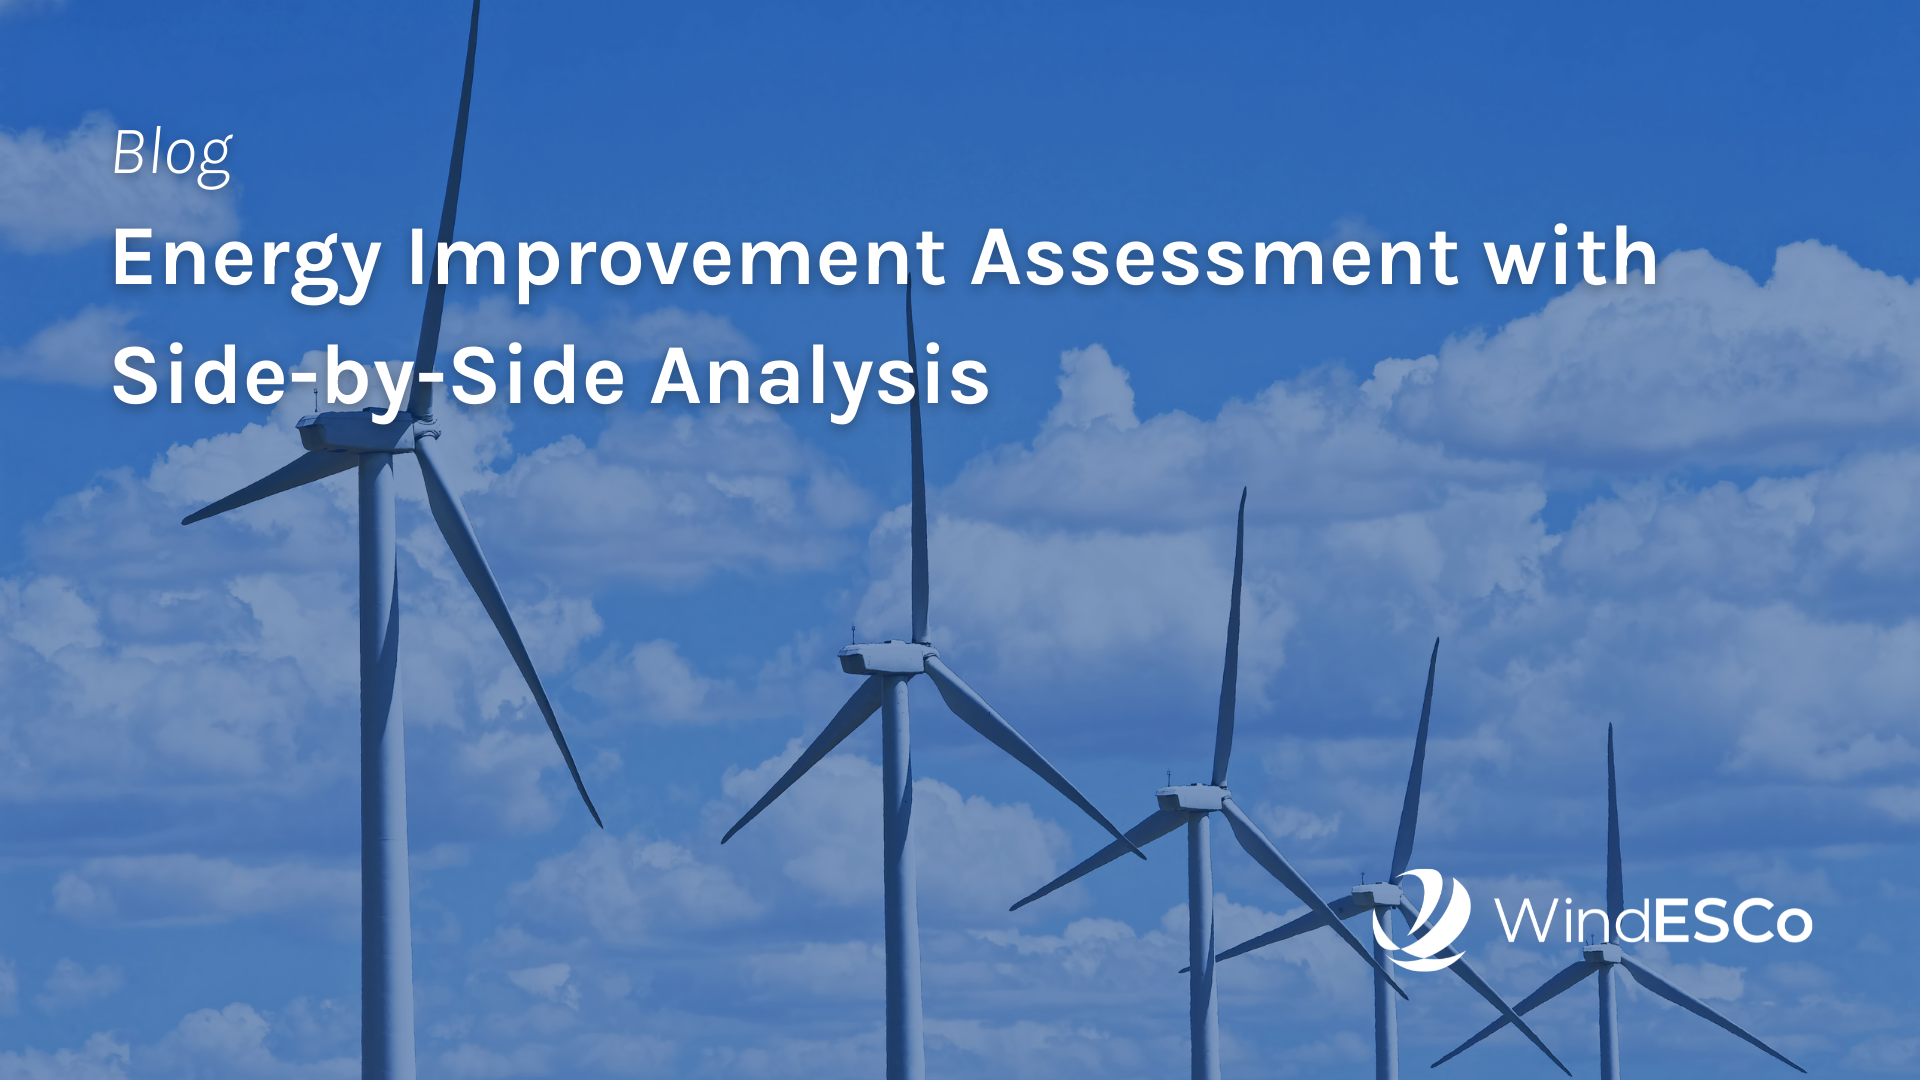 Energy Improvement Assessment: Side-by-side analysis